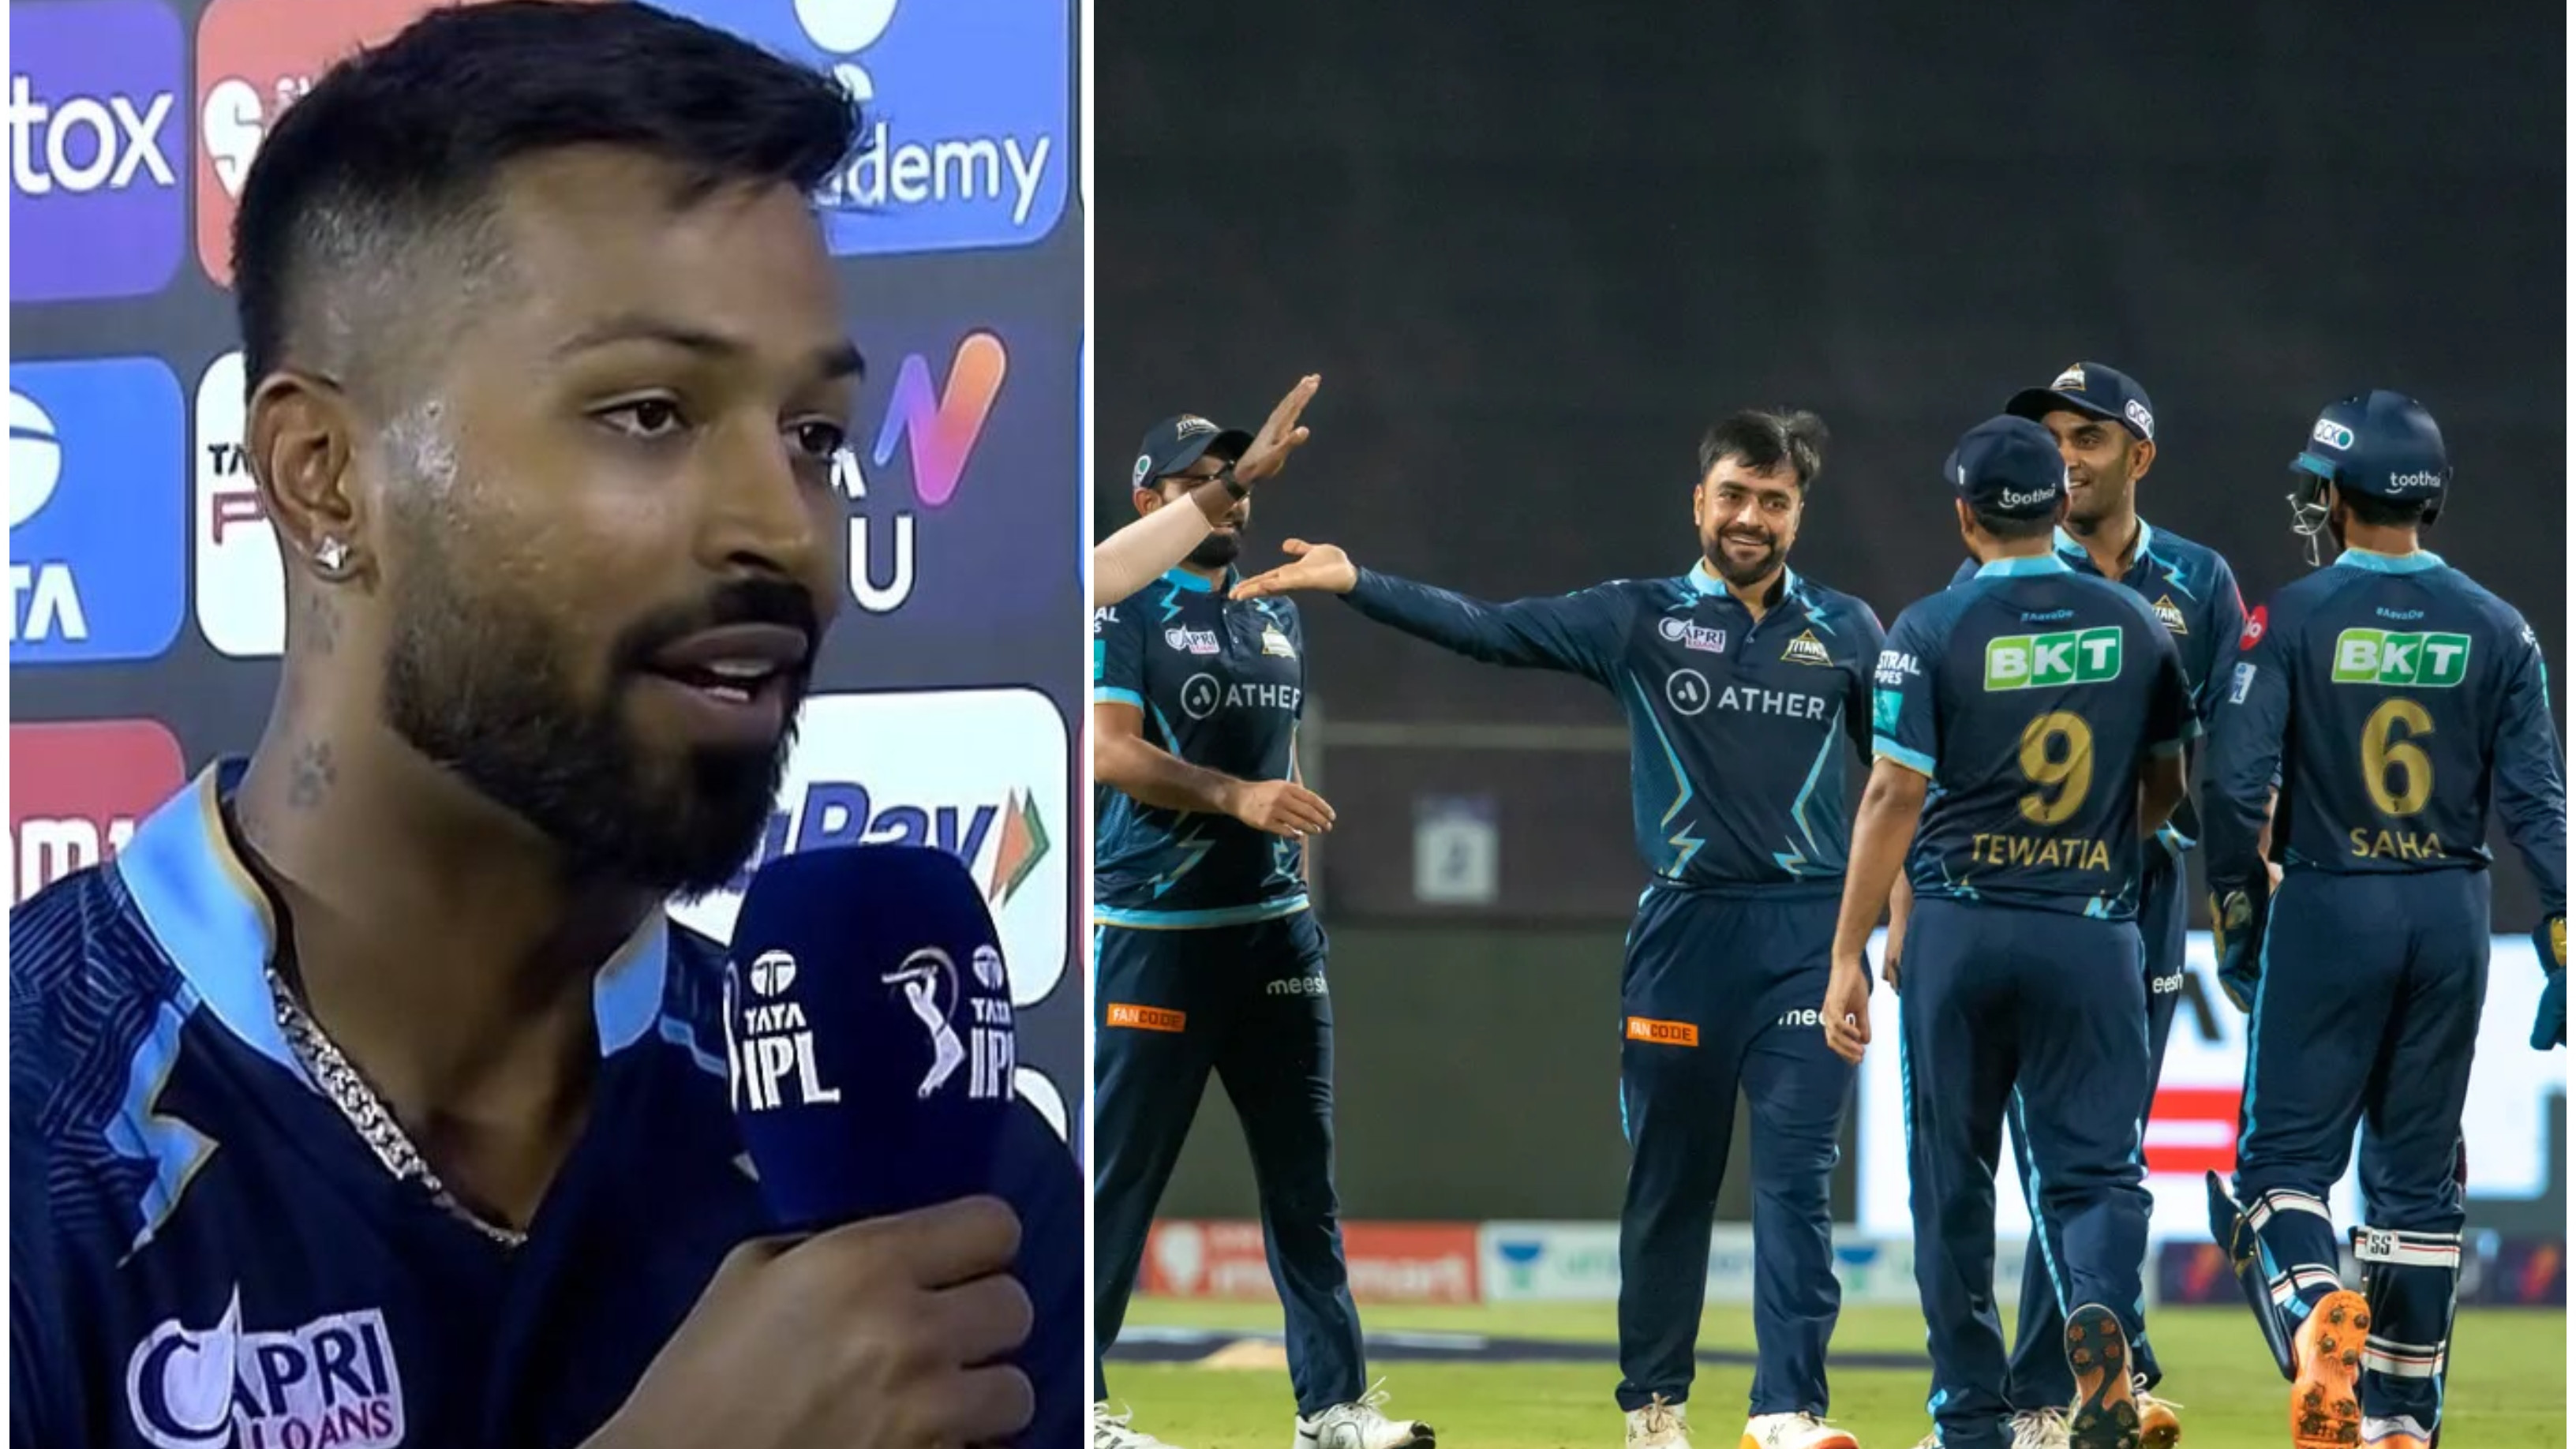 IPL 2022: “Really proud of the boys”, says Hardik Pandya after GT secure playoffs berth by thrashing LSG